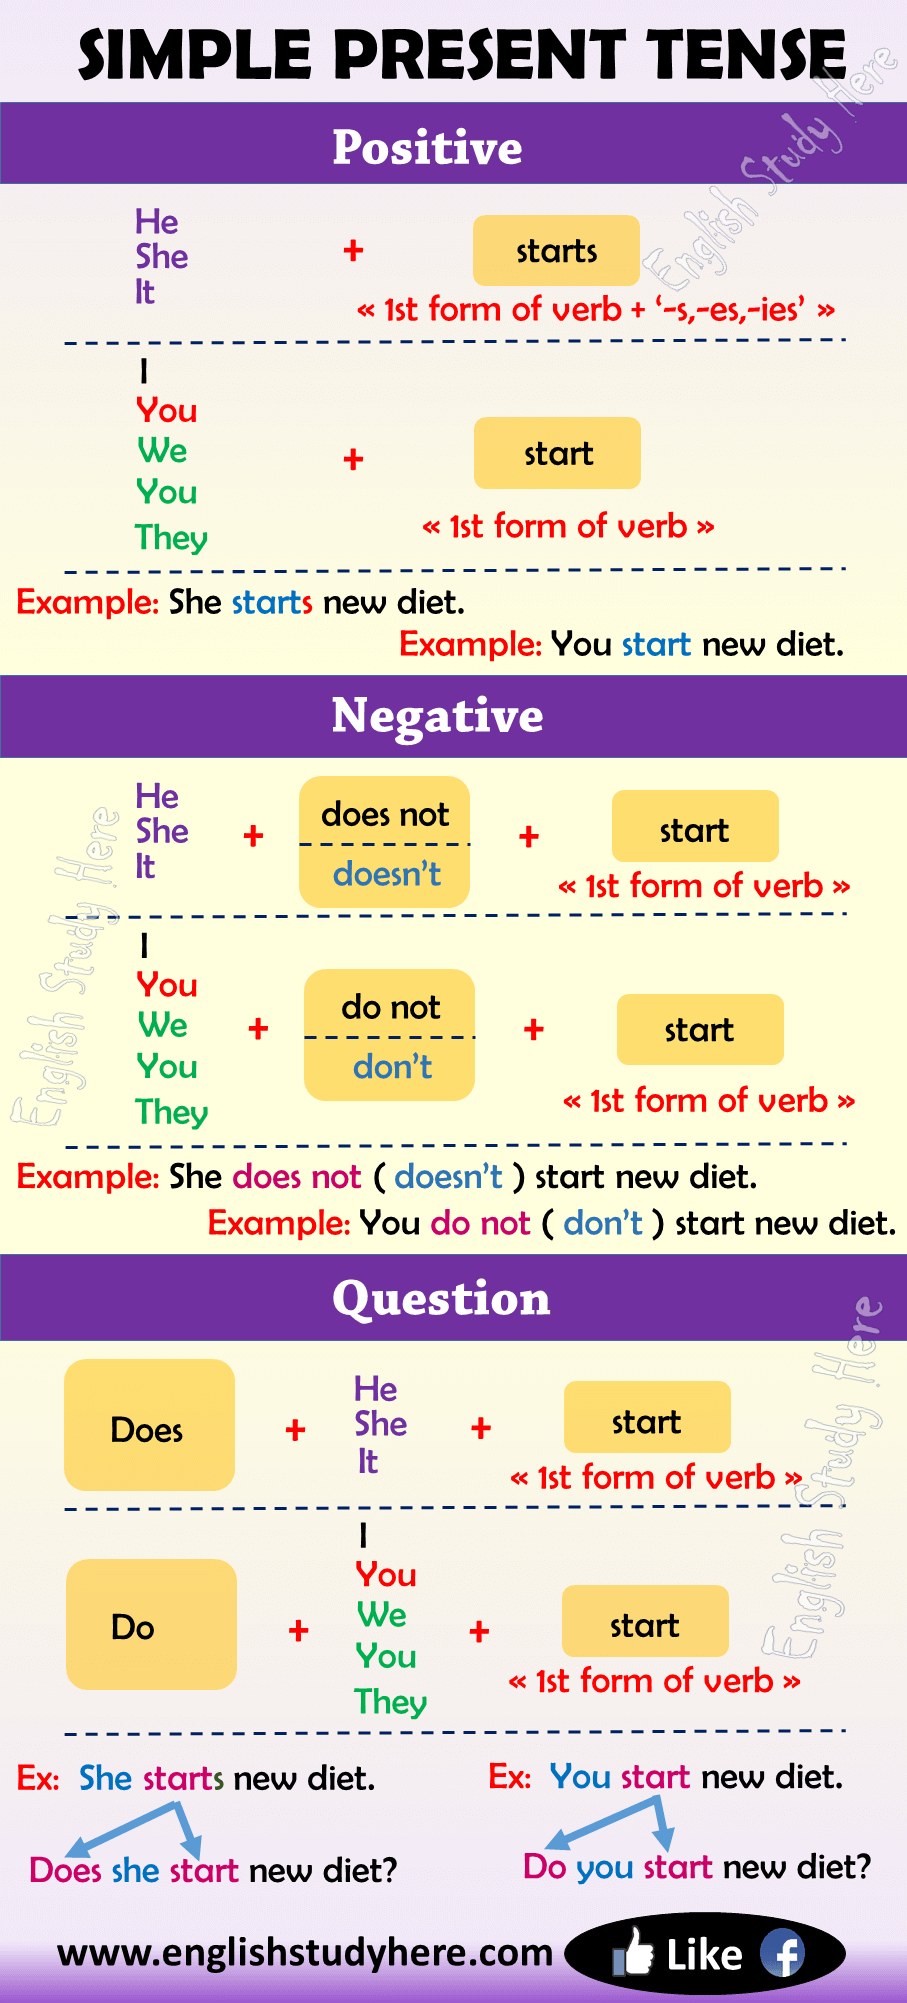 simple-present-tense-in-english-english-study-here